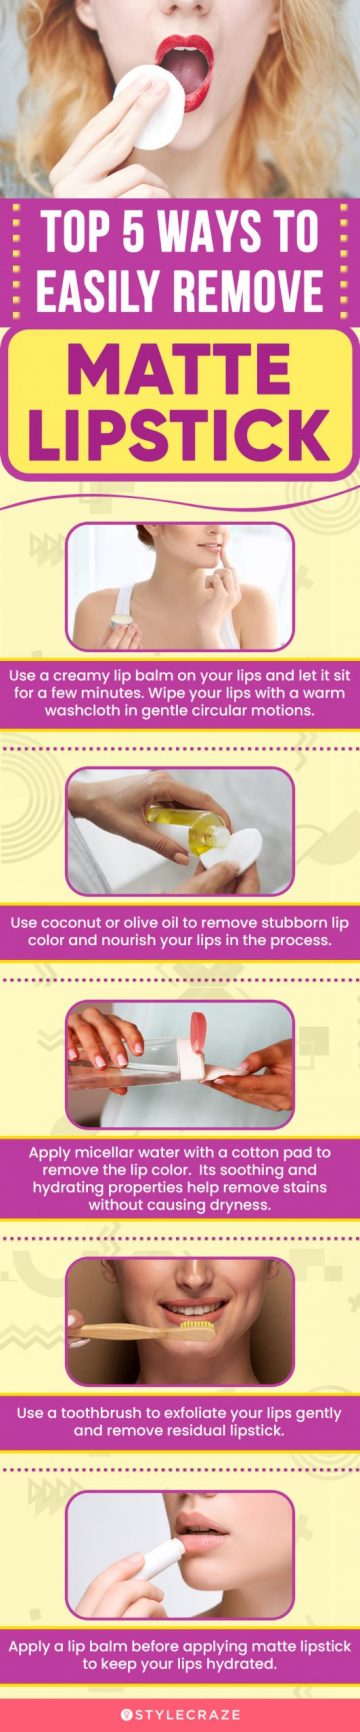 top 5 ways to easily remove matte lipstick (infographic)